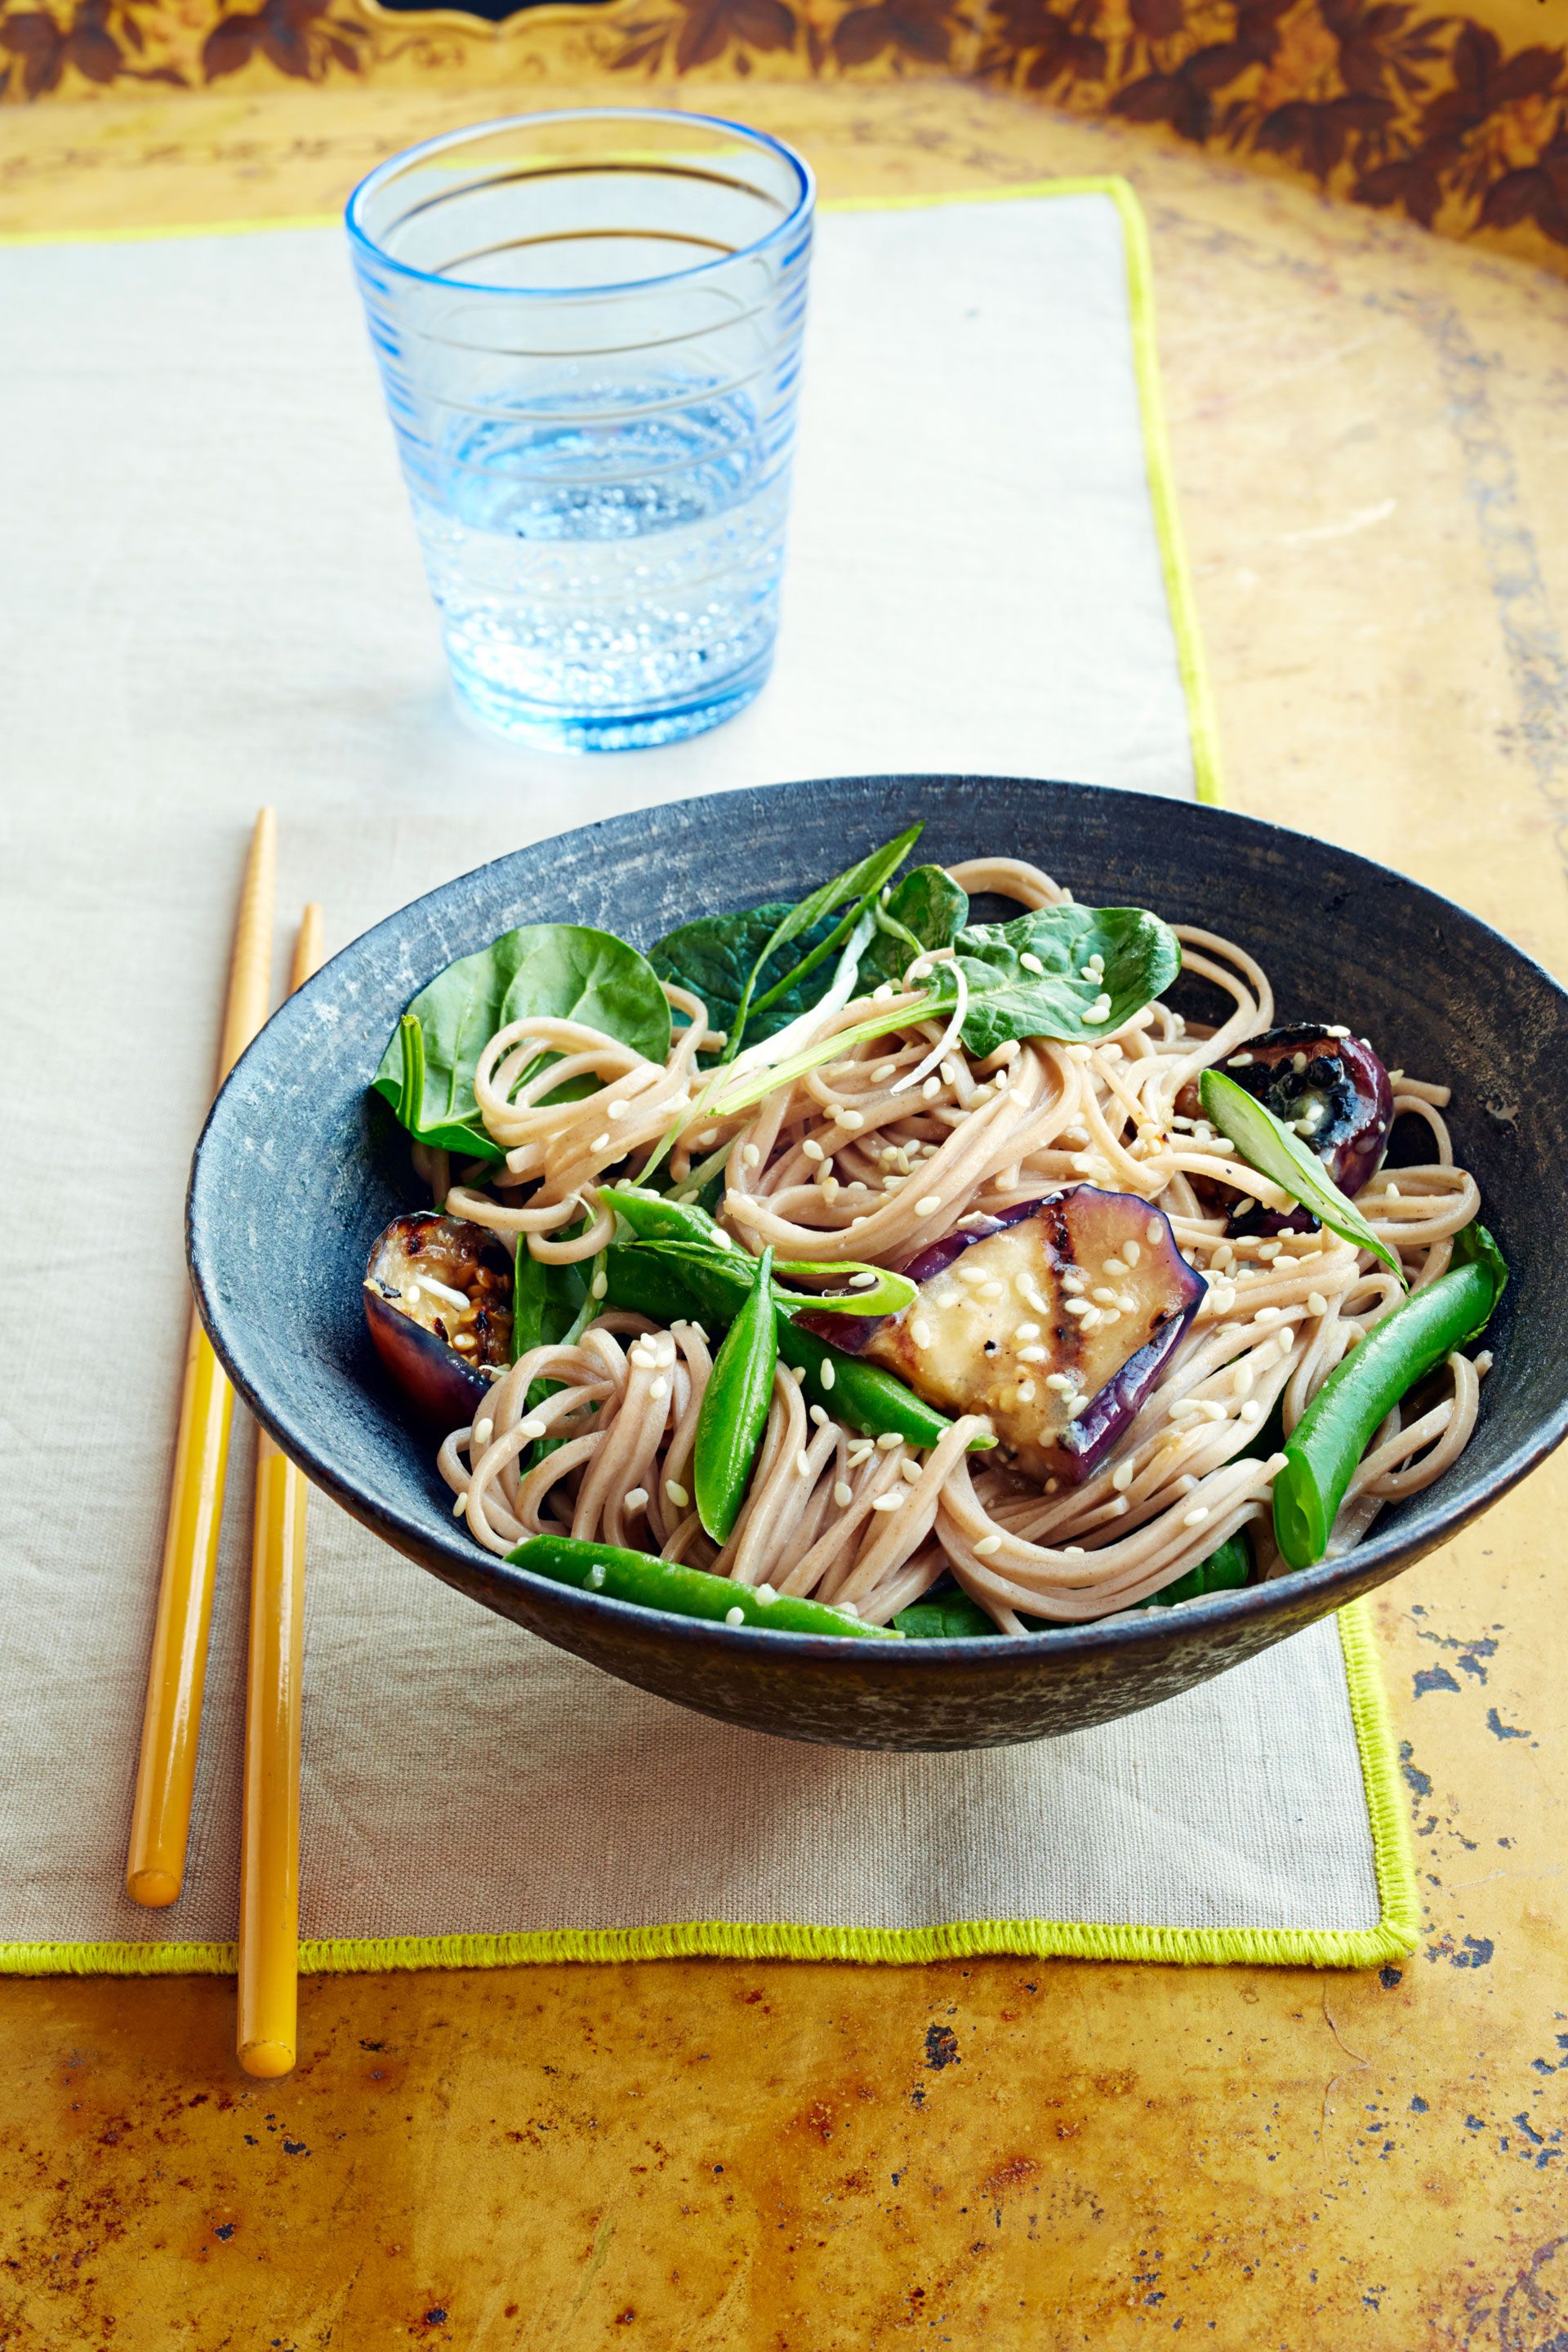 15+ Soba Noodle Recipes - Recipes for Buckwheat Noodles